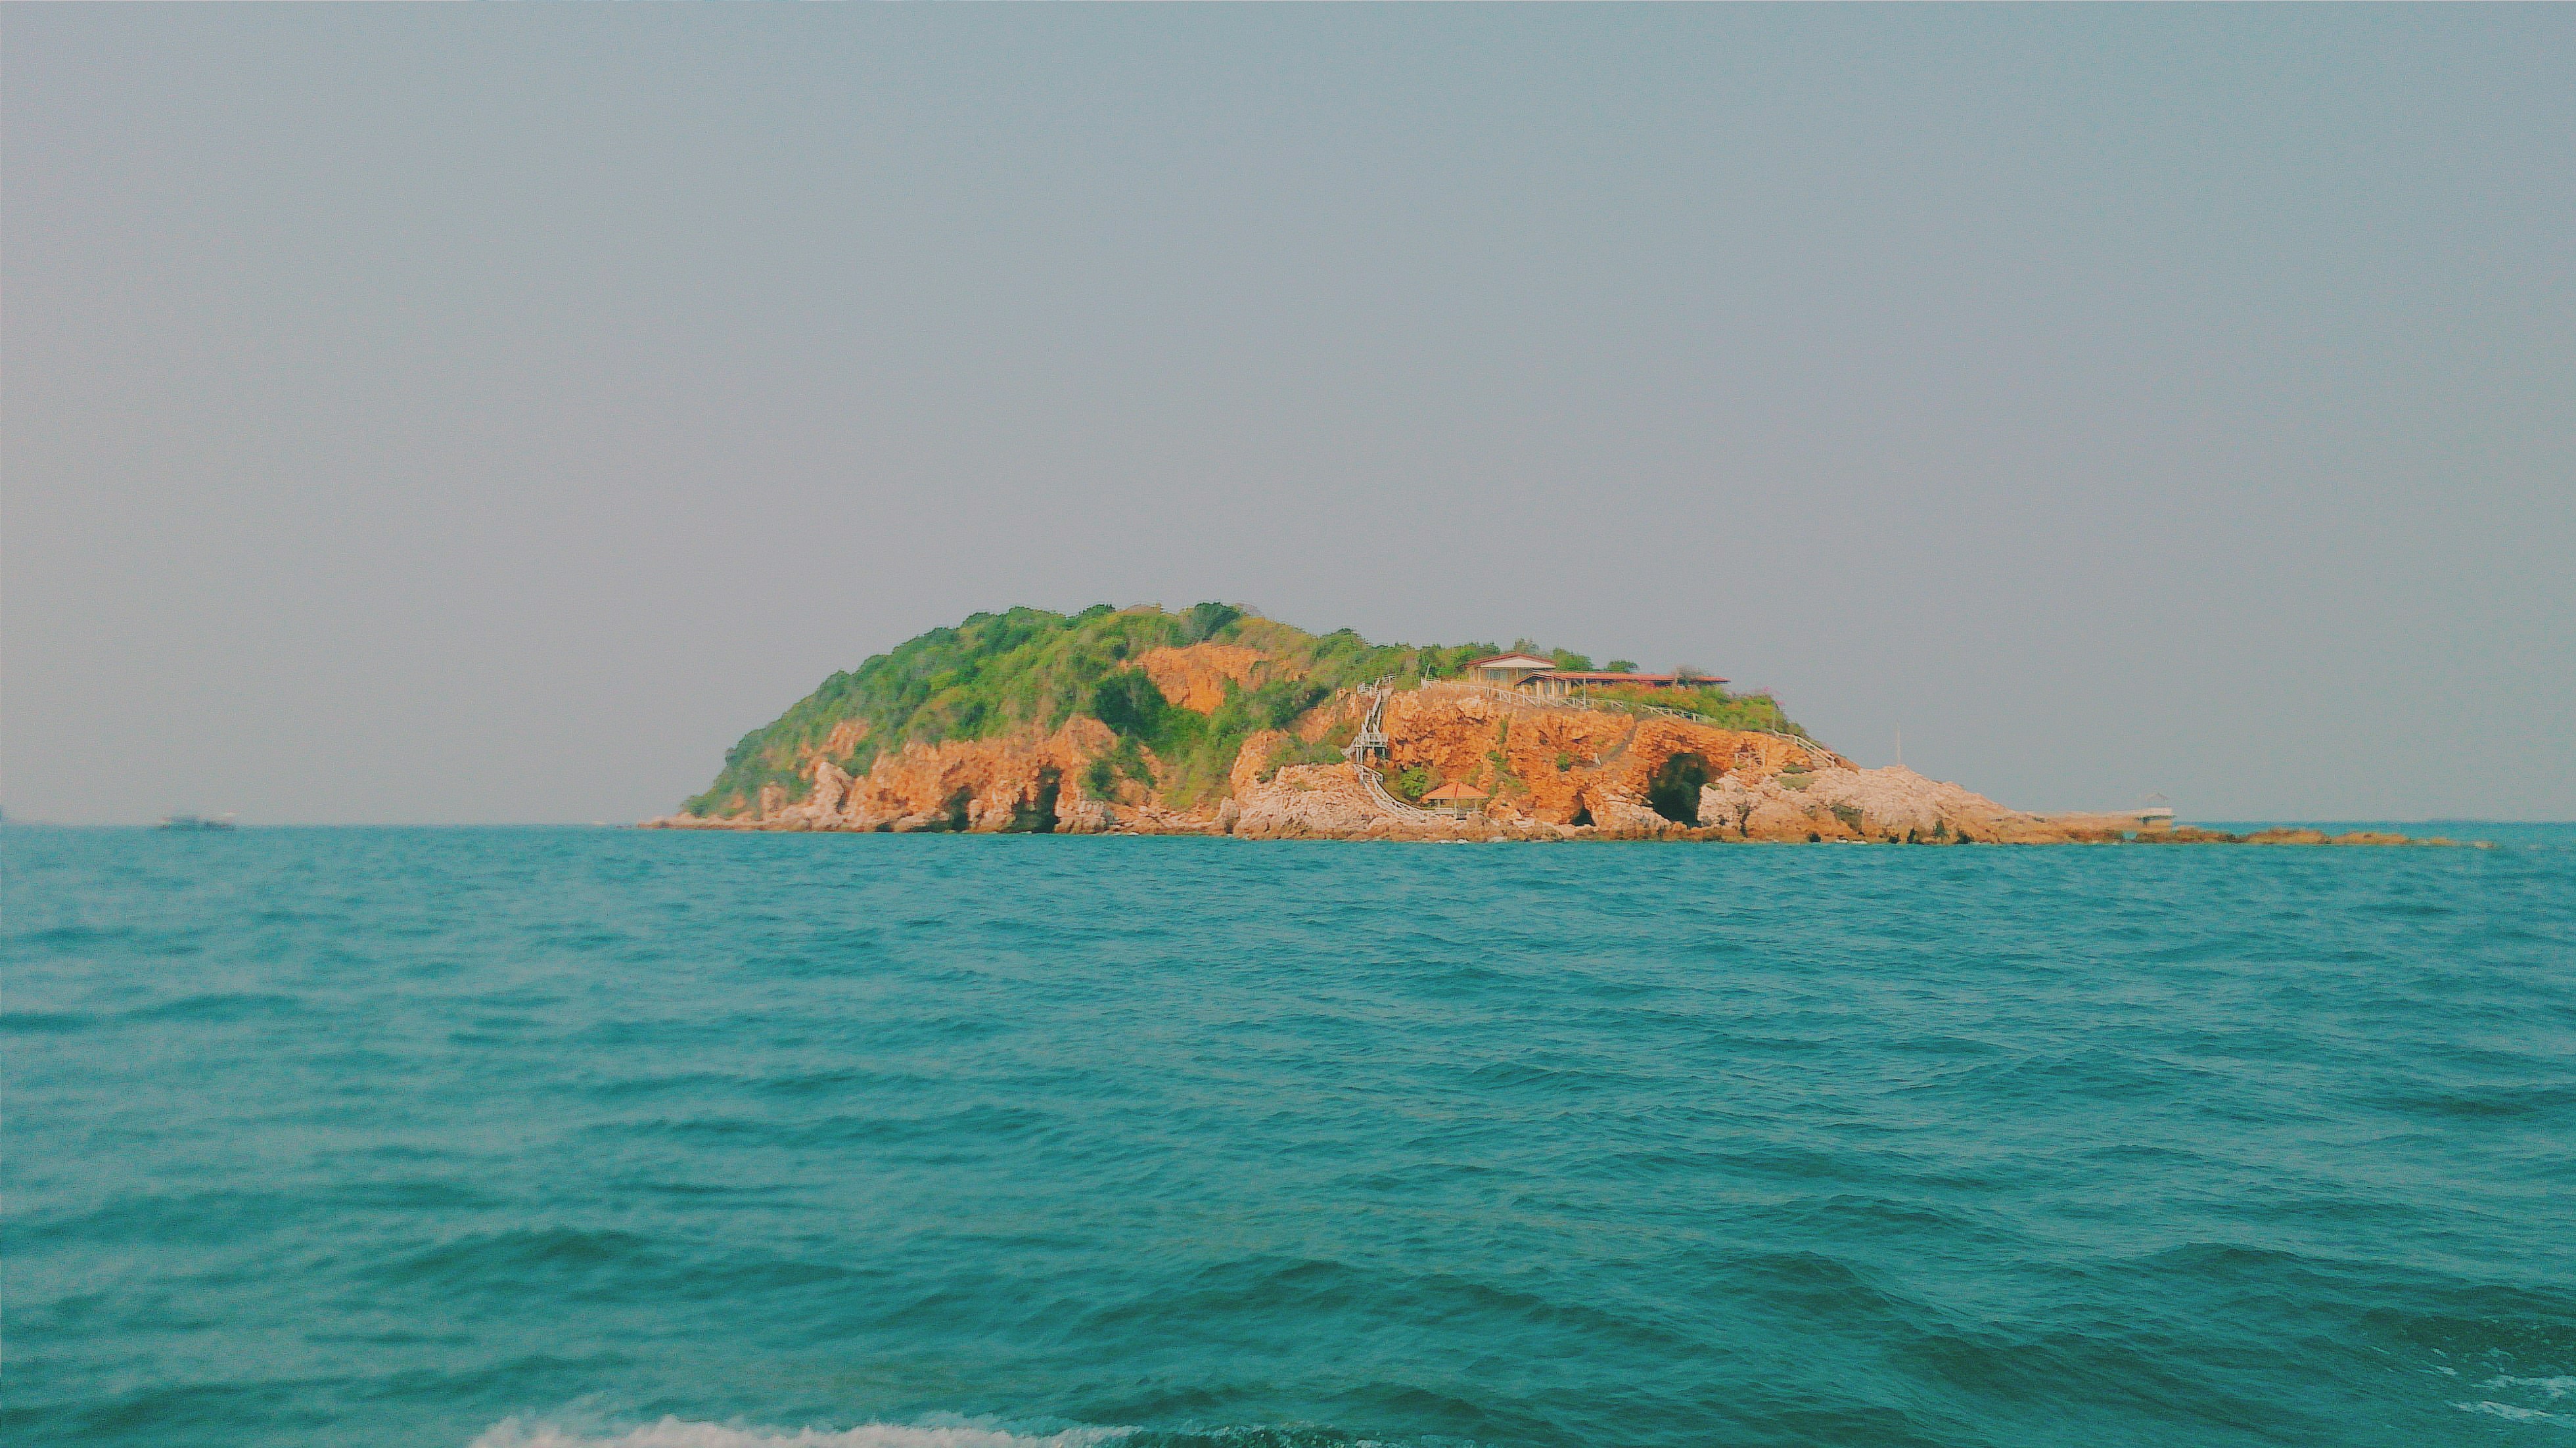 brown and green island on blue sea under white sky during daytime